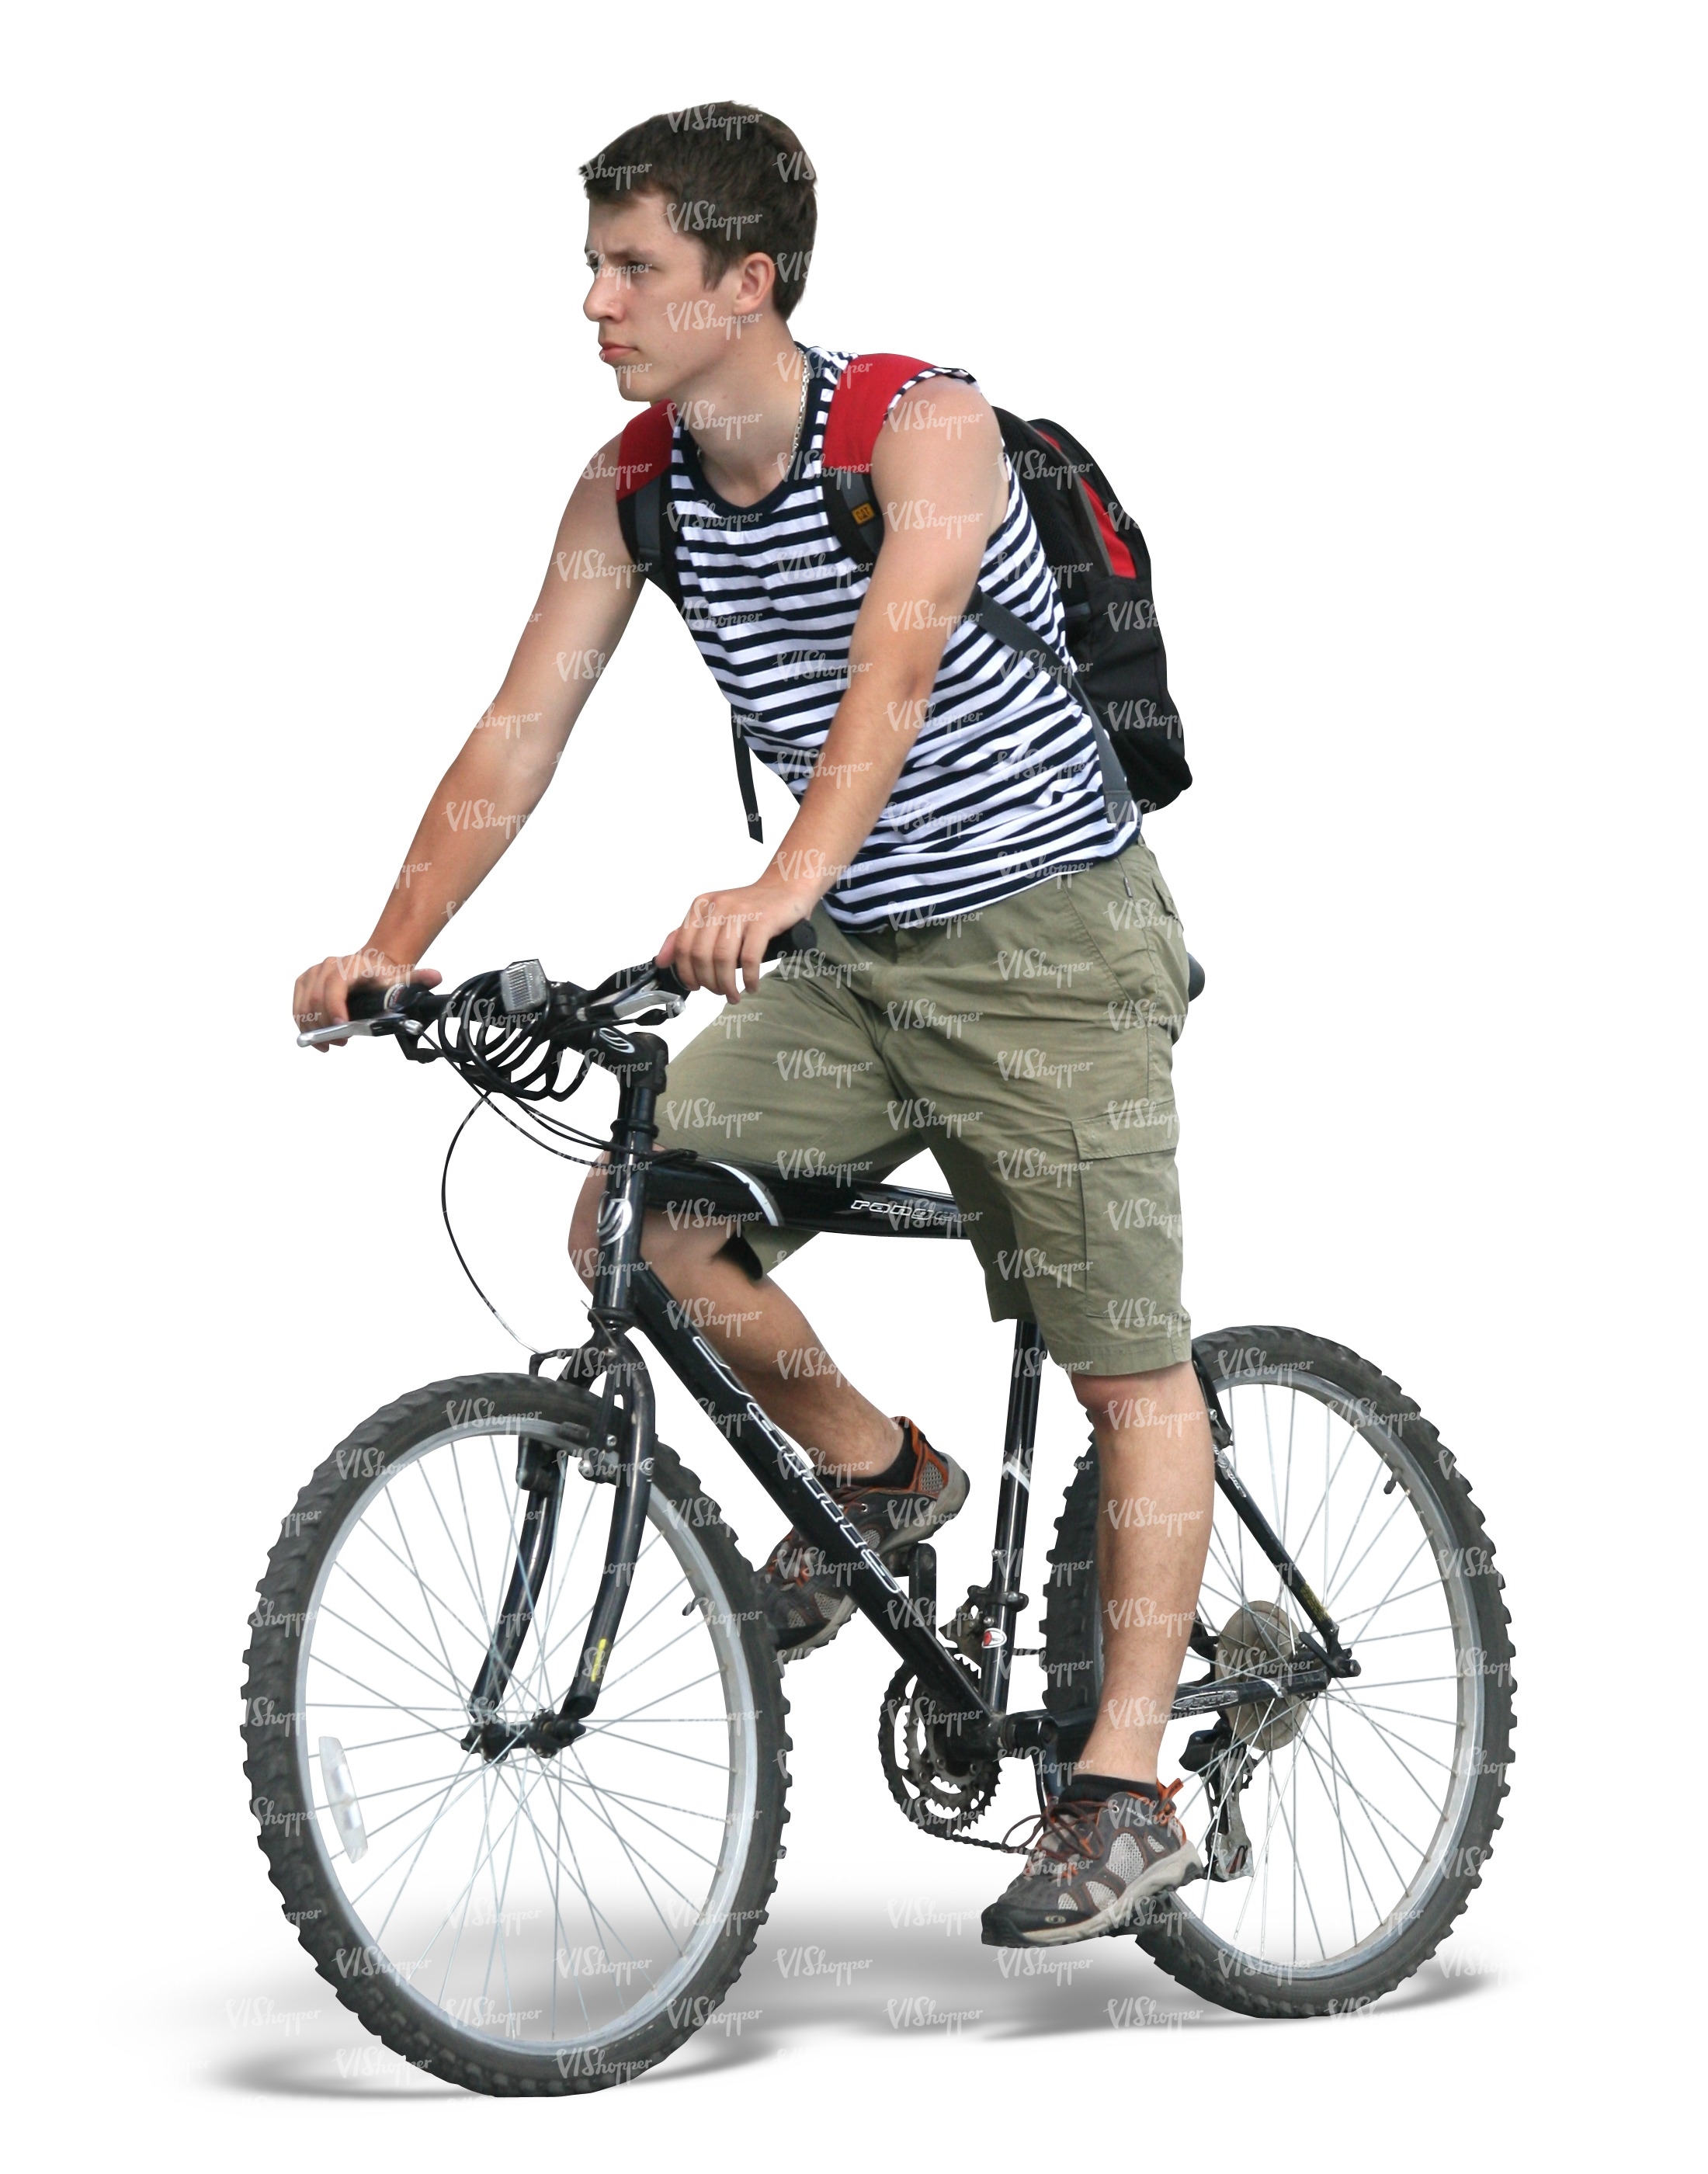 cut out man in shorts riding a bike - cut out people - VIShopper